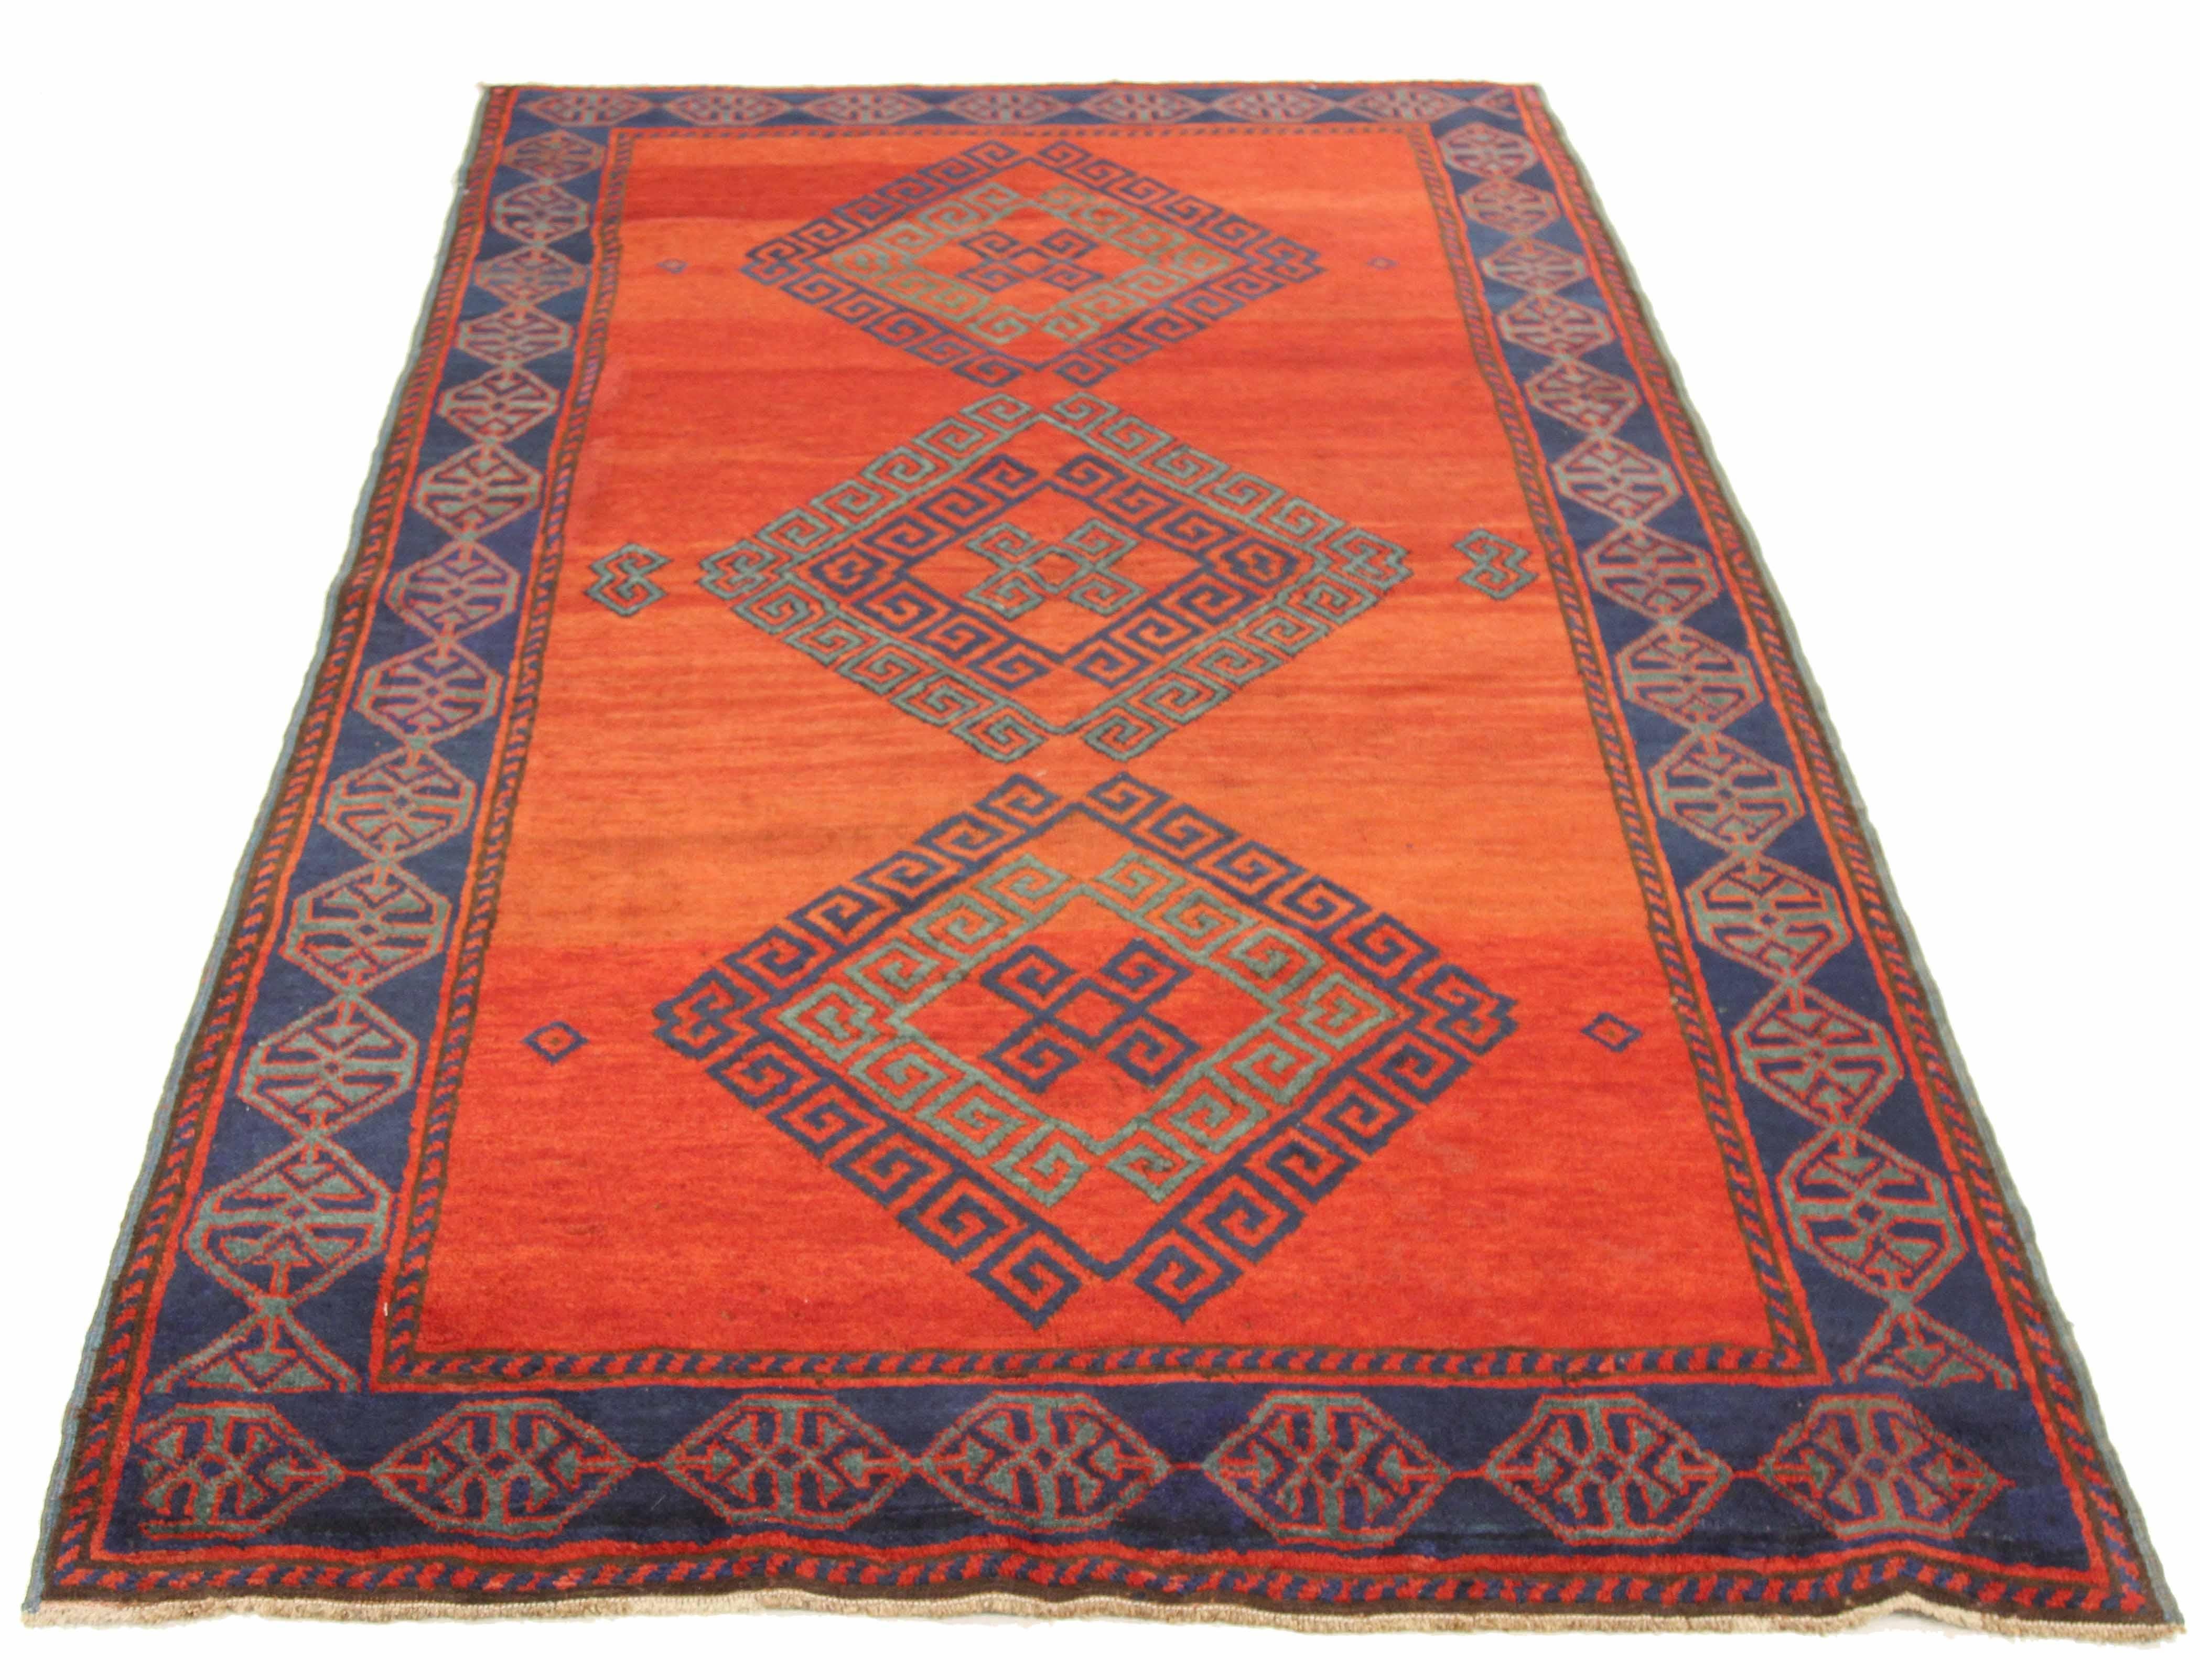 Antique Russian area rug handwoven from the finest sheep’s wool. It’s colored with all-natural vegetable dyes that are safe for humans and pets. It’s a traditional Kazak design handwoven by expert artisans. It’s a lovely area rug that can be